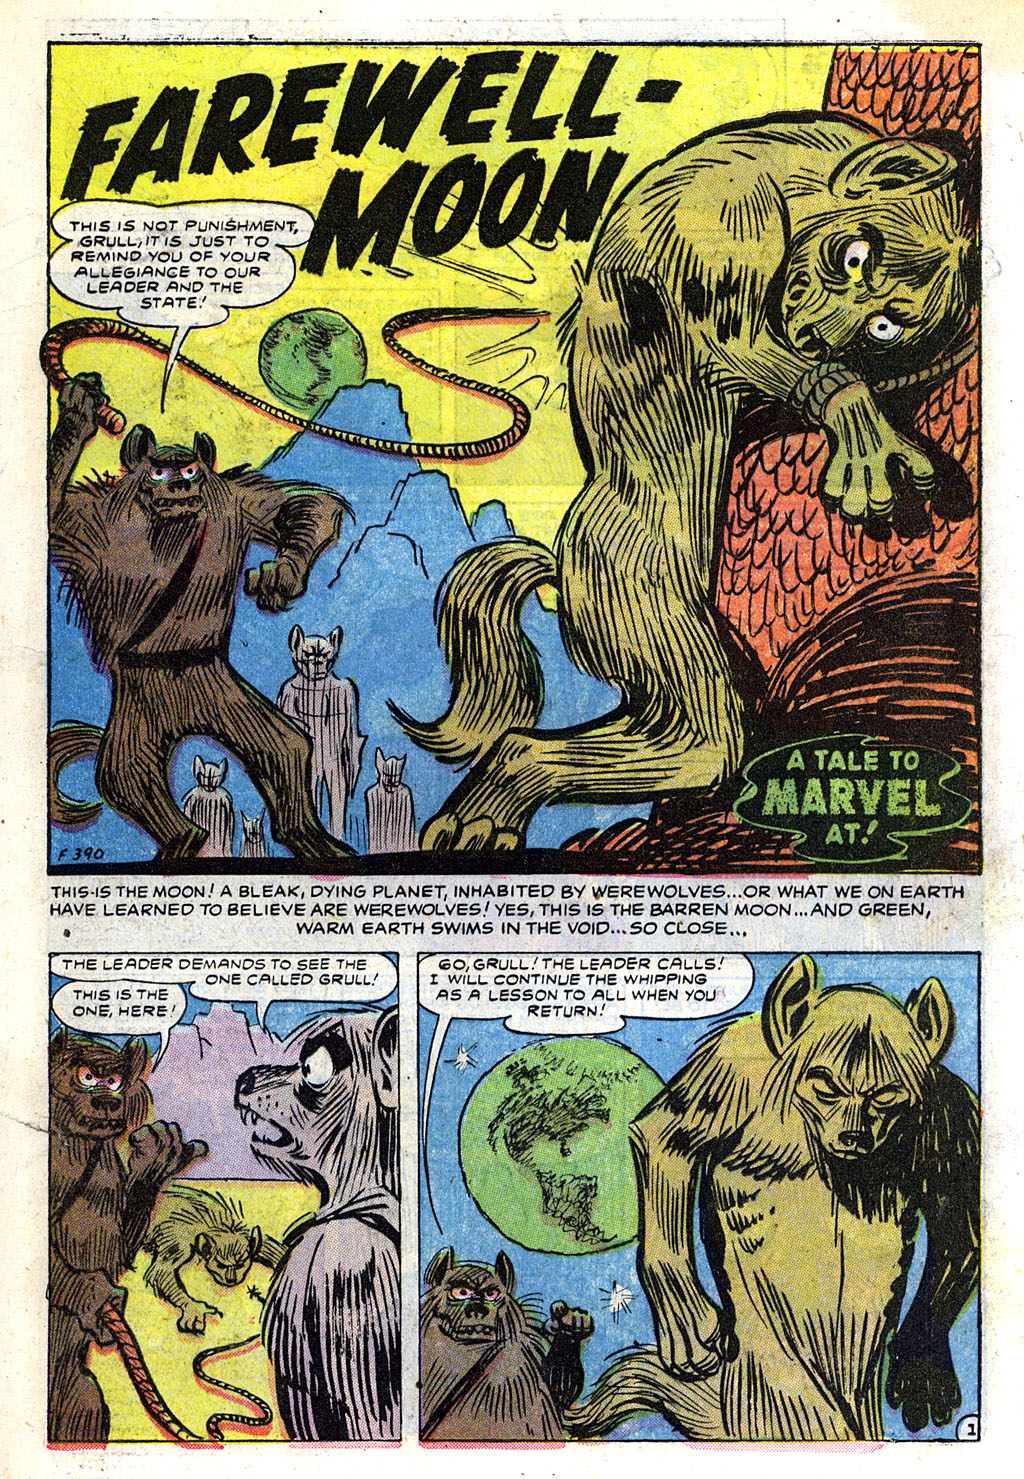 Marvel Tales (1949) 131 Page 20